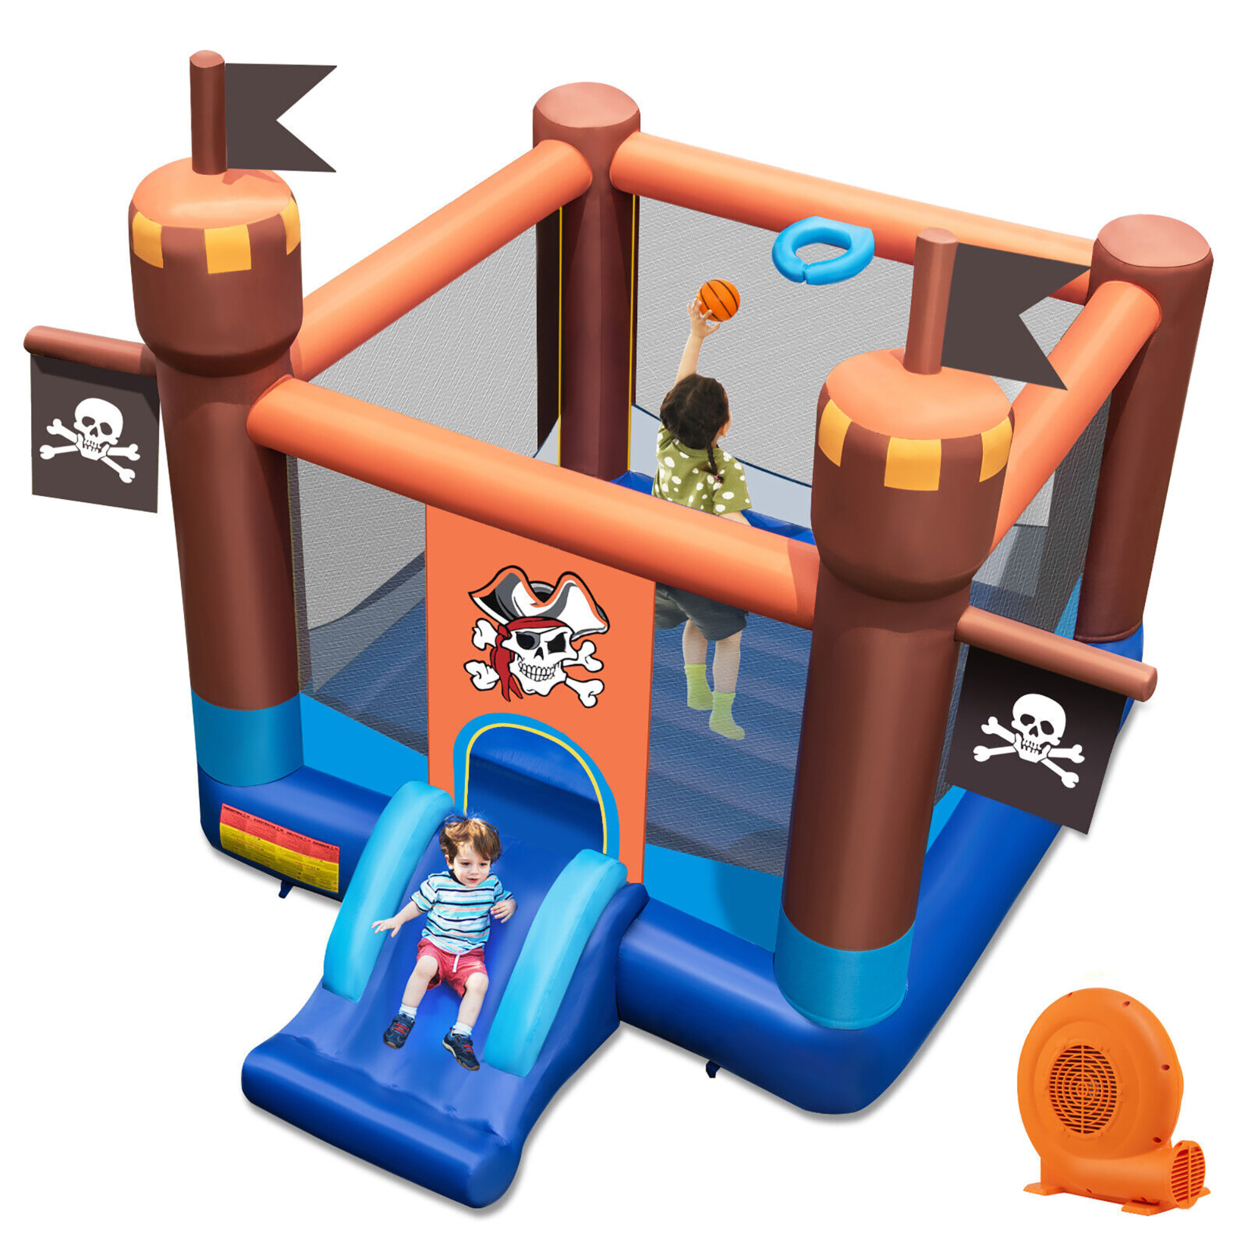 Pirate Themed Inflatable Bounce Castle With Large Jumping Area & 750W Blower